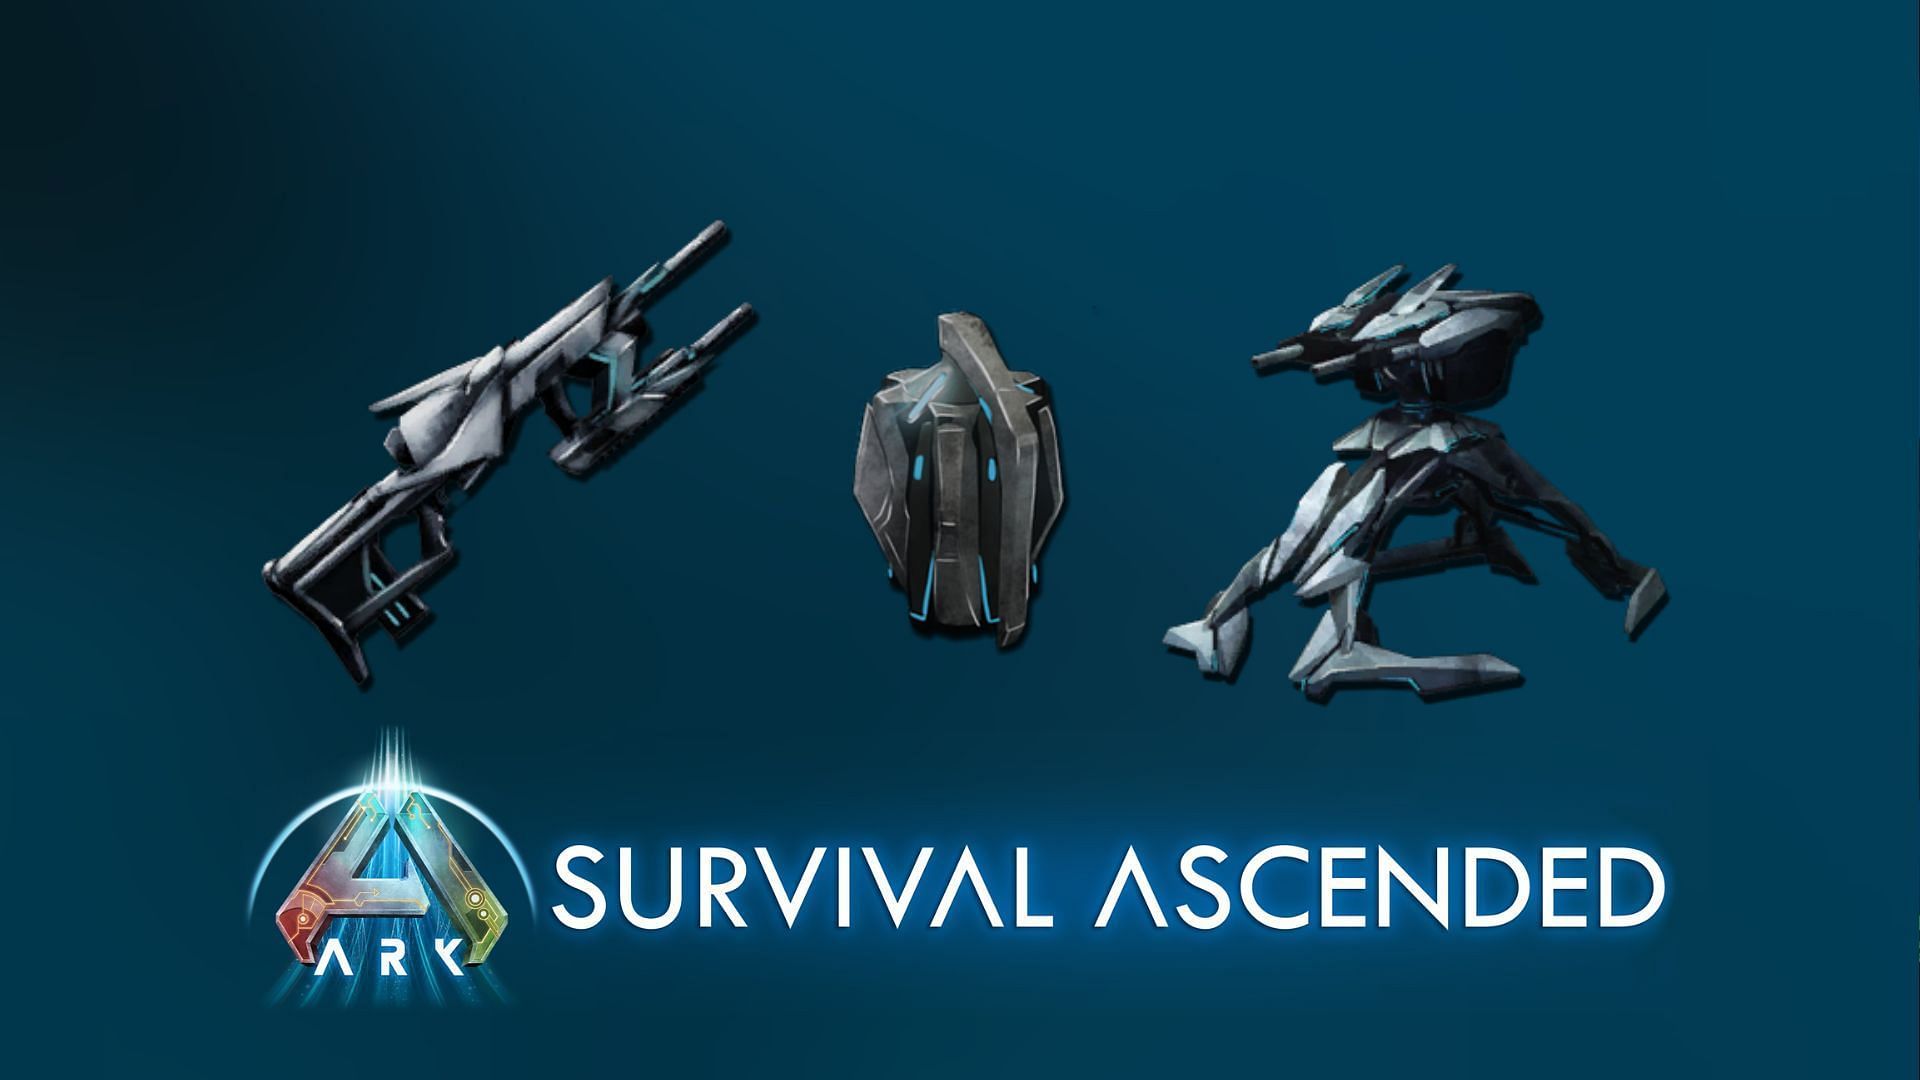 Exploring all the Tek weapons in Ark Survival Ascended and ways of getting them (Image via Studio Wildcard)